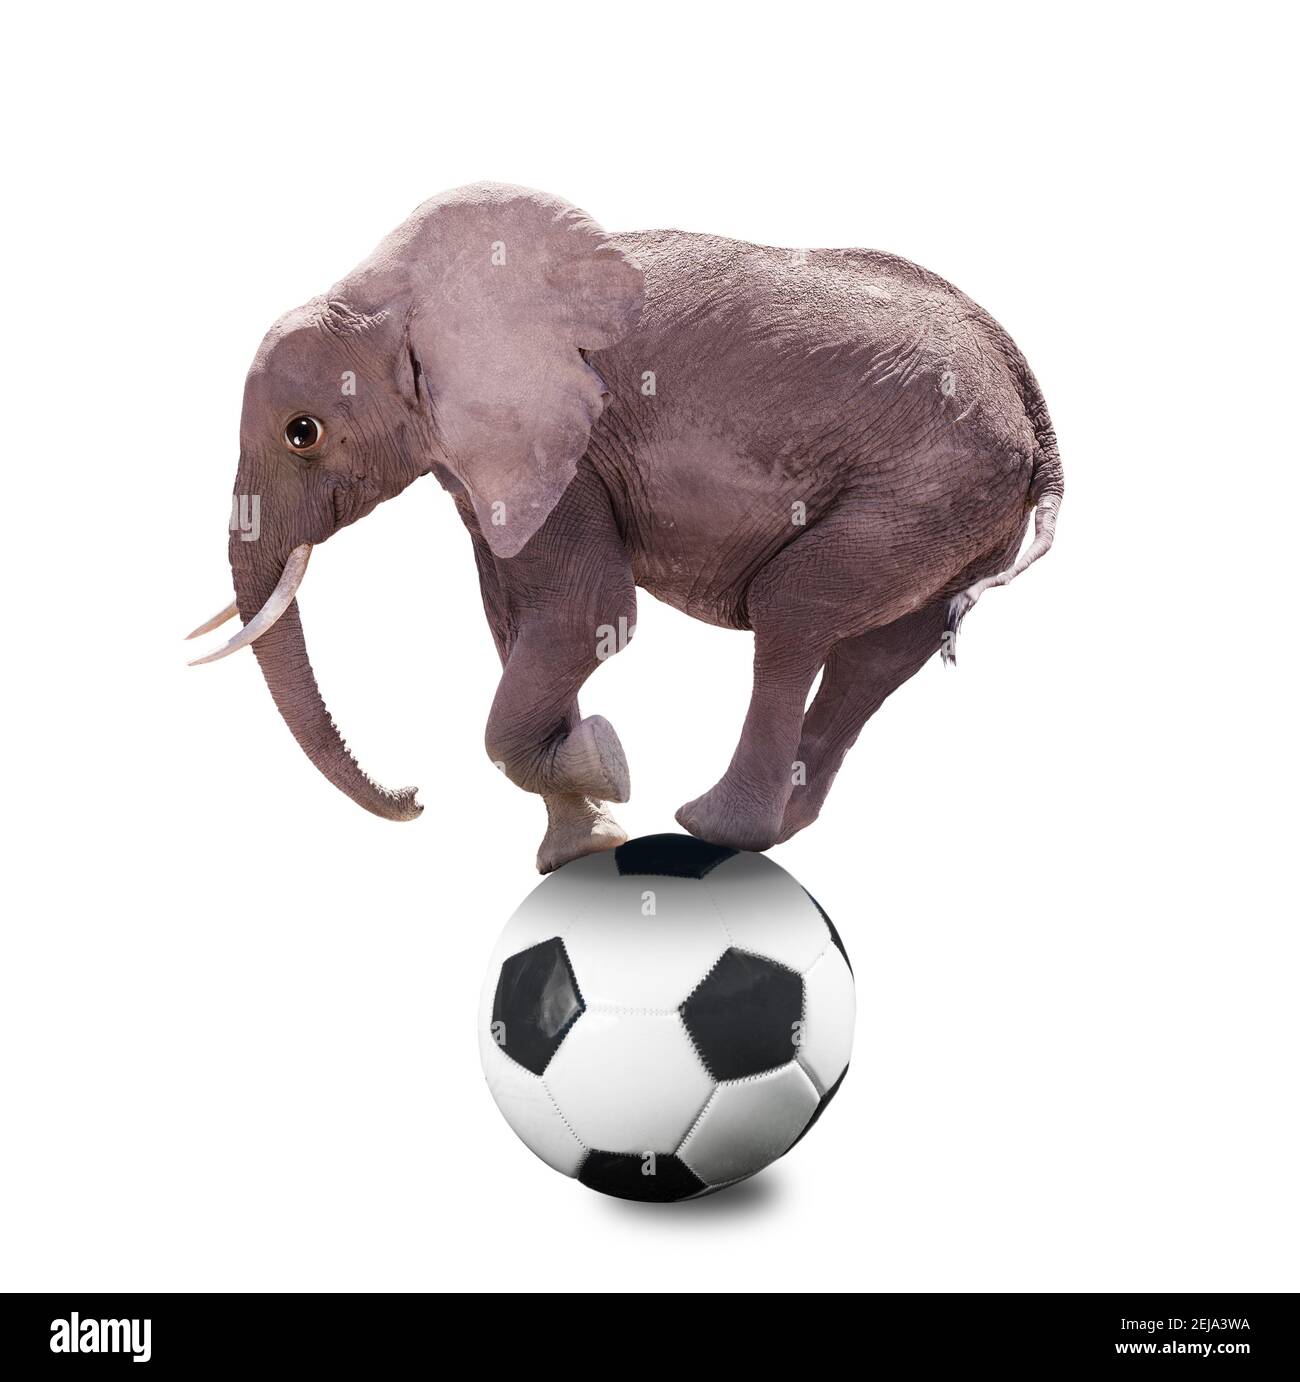 Photograph of an Elephant standing on football ball sport mixed-media concept Stock Photo